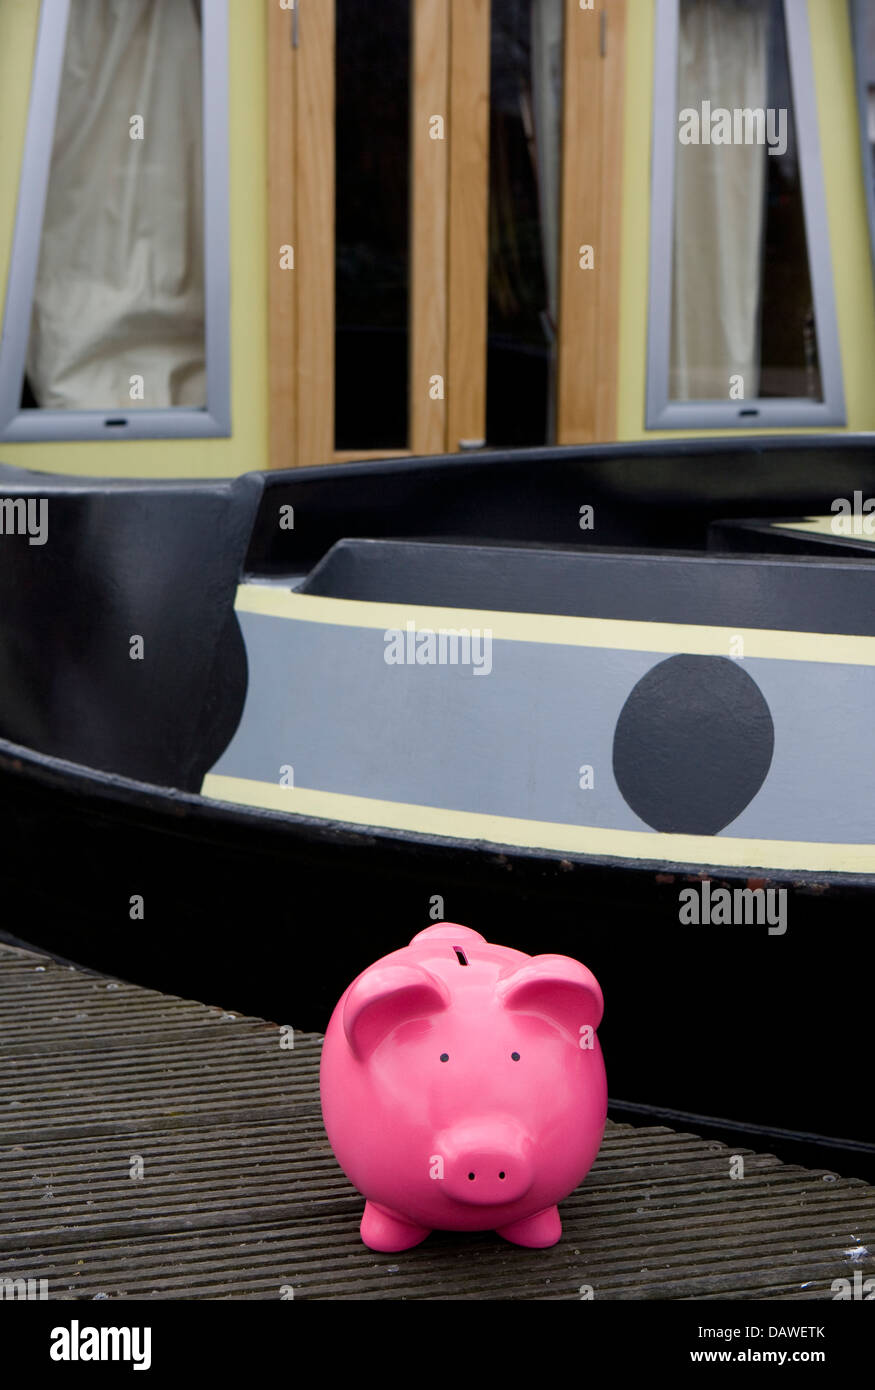 Saving money on a canal boat holiday Stock Photo